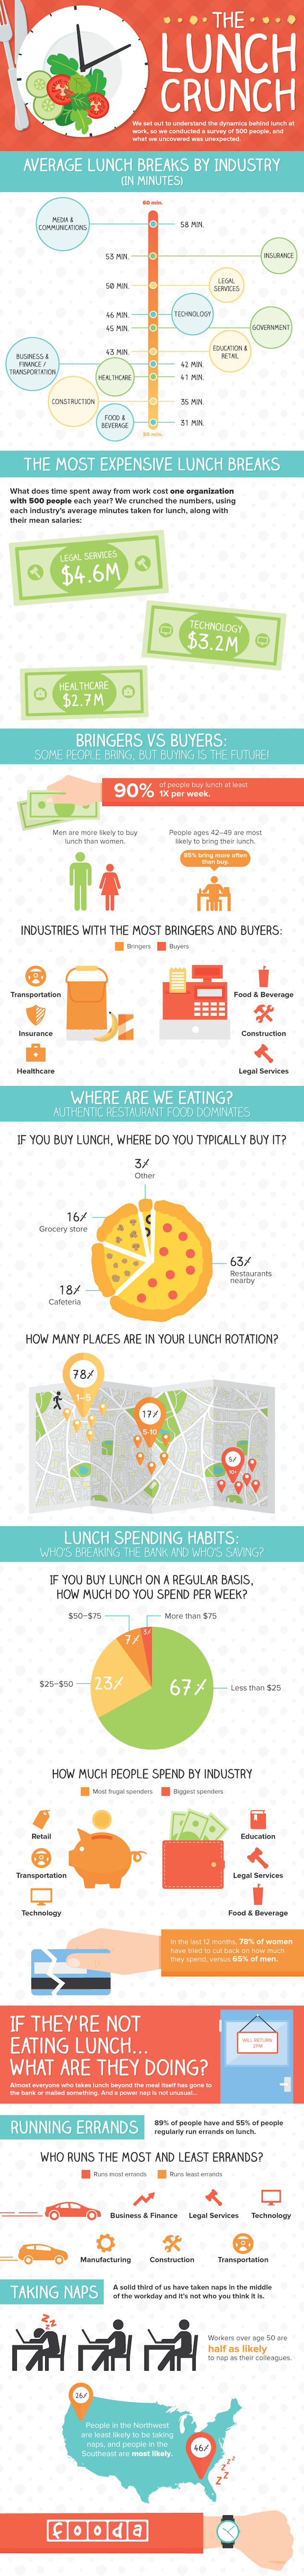 lunch-crunch-infographic-6-30v3-EDITED.png